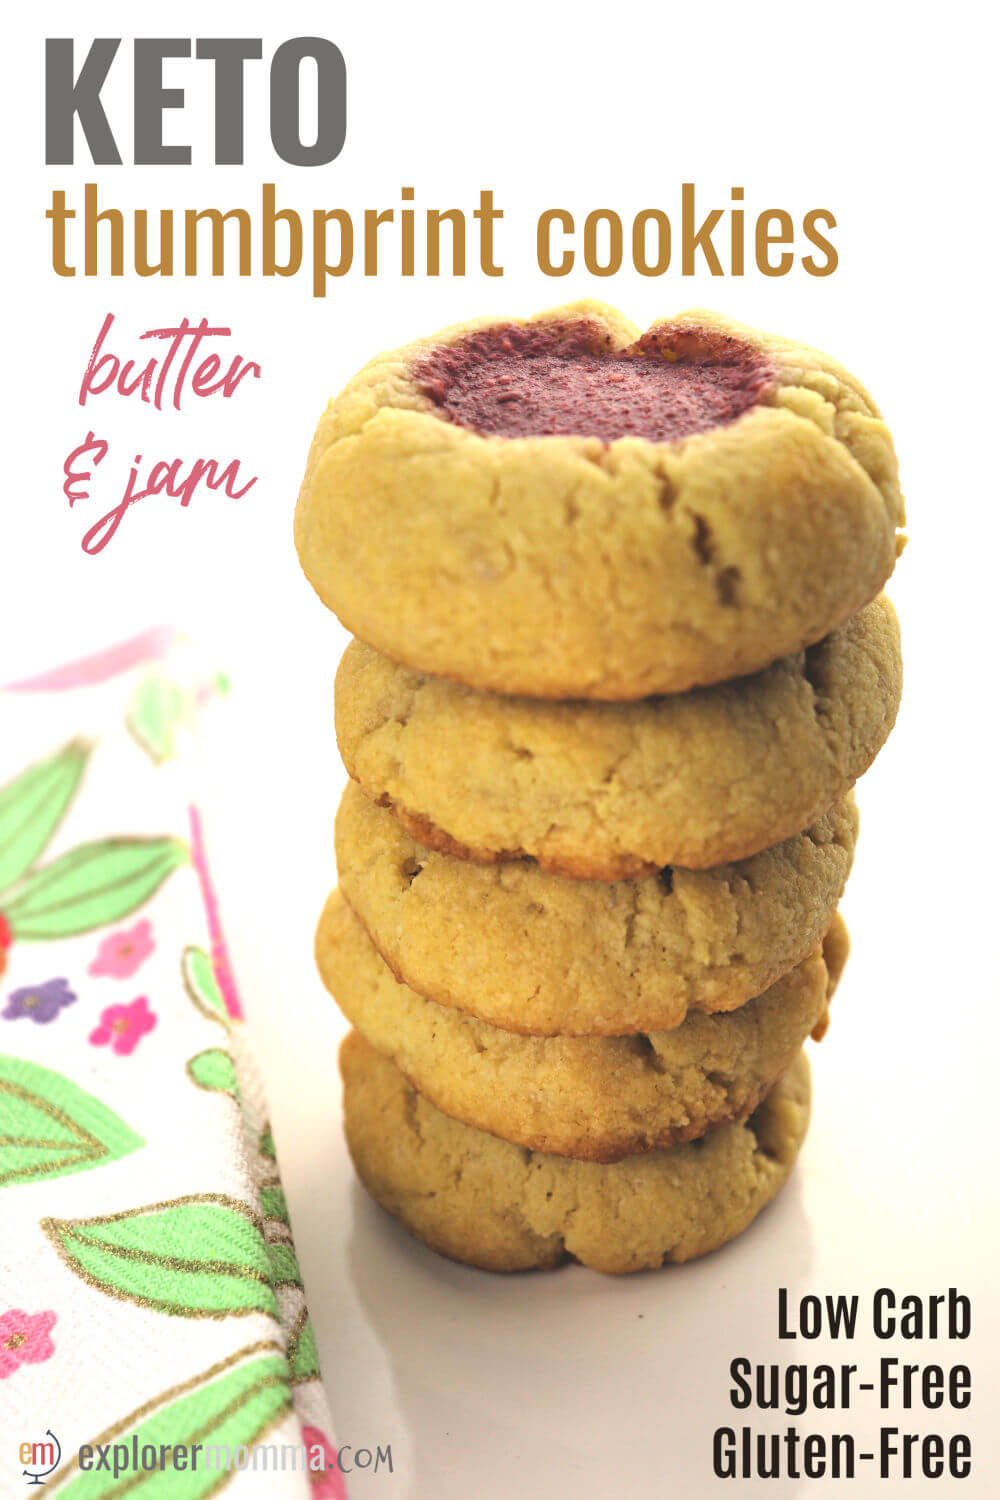 Delicious, easy butter and jam keto thumbprint cookies are the perfect low carb snack! Super kid-friendly and perfect for Easter, Christmas, Fourth of July, you name it! Gluten-free cookies with a strawberry tang. #ketorecipes #lowcarbcookies